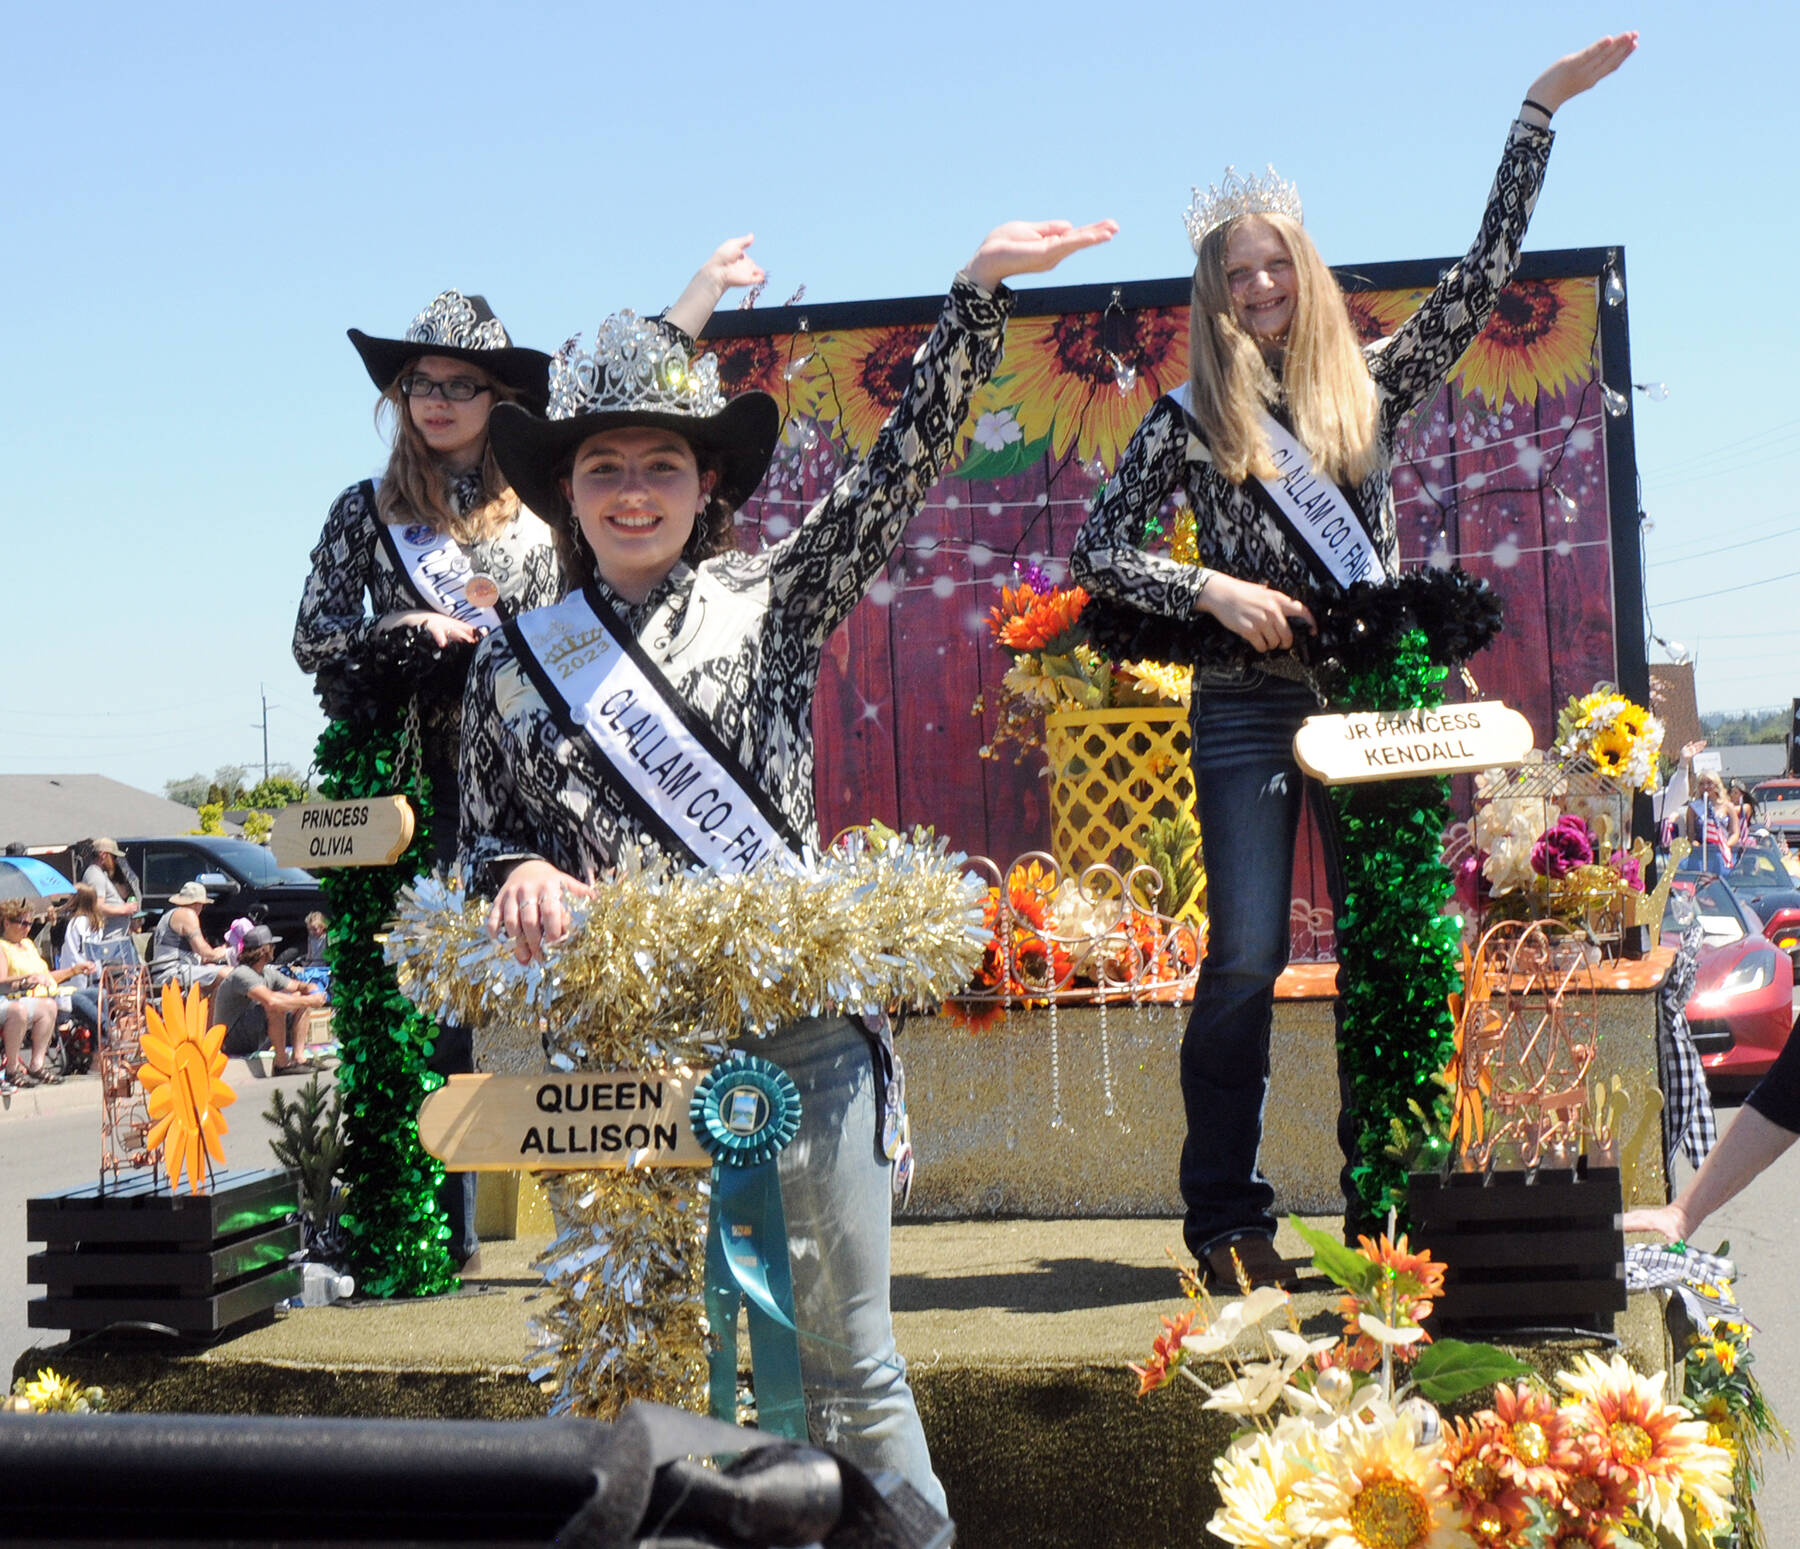 Clallam County Fair royalty, from left, Princess Olivia Ostlund, Queen Allison Pettit and Junior Princess Kendall Adolphe ride their festival float, which received the Irrigation Festival Chairman’s Award at the Sequim Irrigation Festival in May.